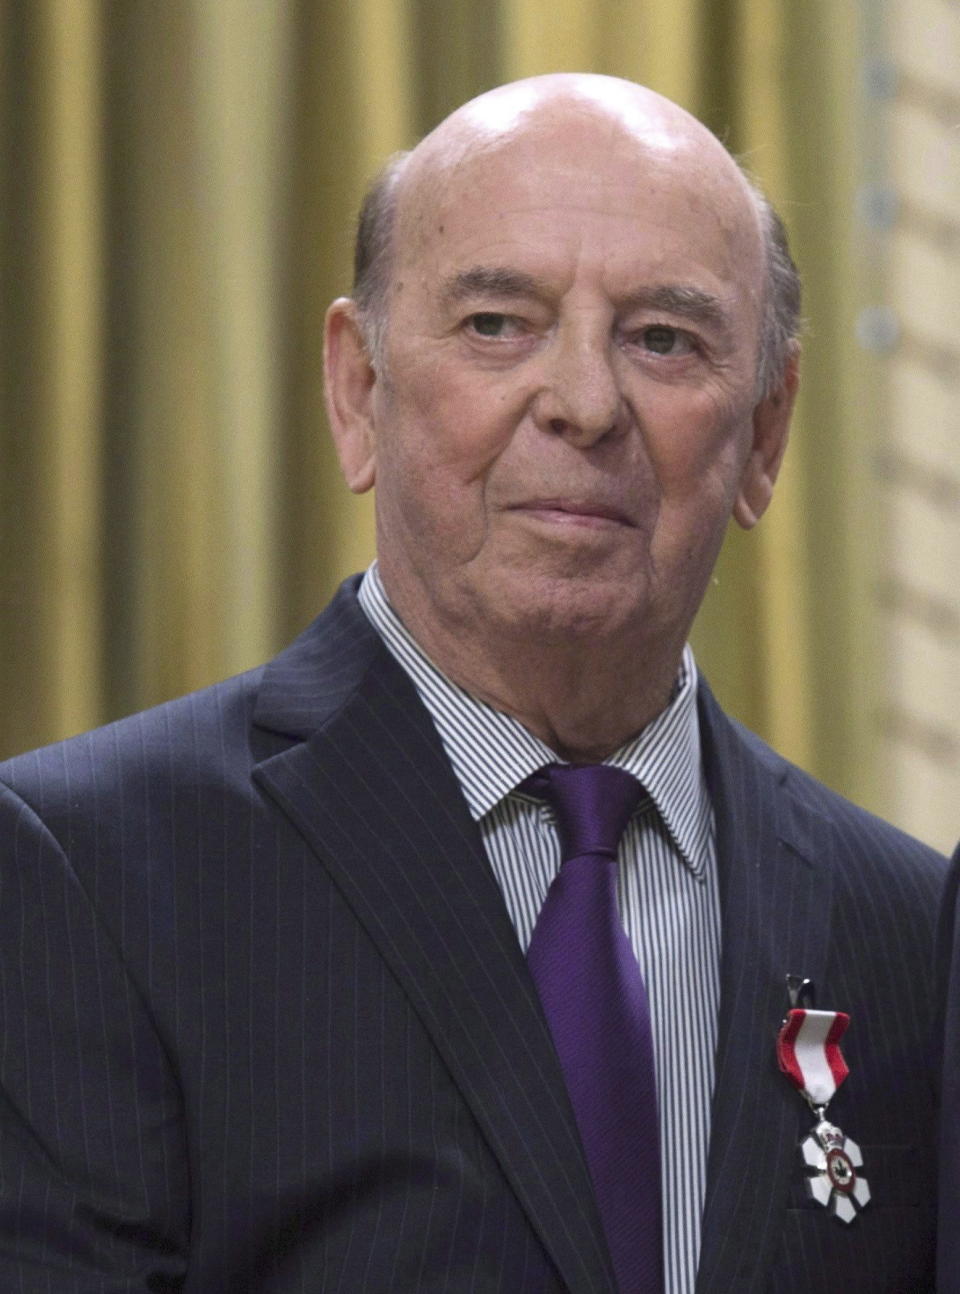 FILE - Bob Cole attends an Order of Canada ceremony at Rideau Hall, Friday, Sept. 23, 2016 in Ottawa, Ontario. Broadcaster Cole, the voice of hockey in Canada for a half-century, has died. He was 90. (Adrian Wyld/The Canadian Press via AP, FIle)